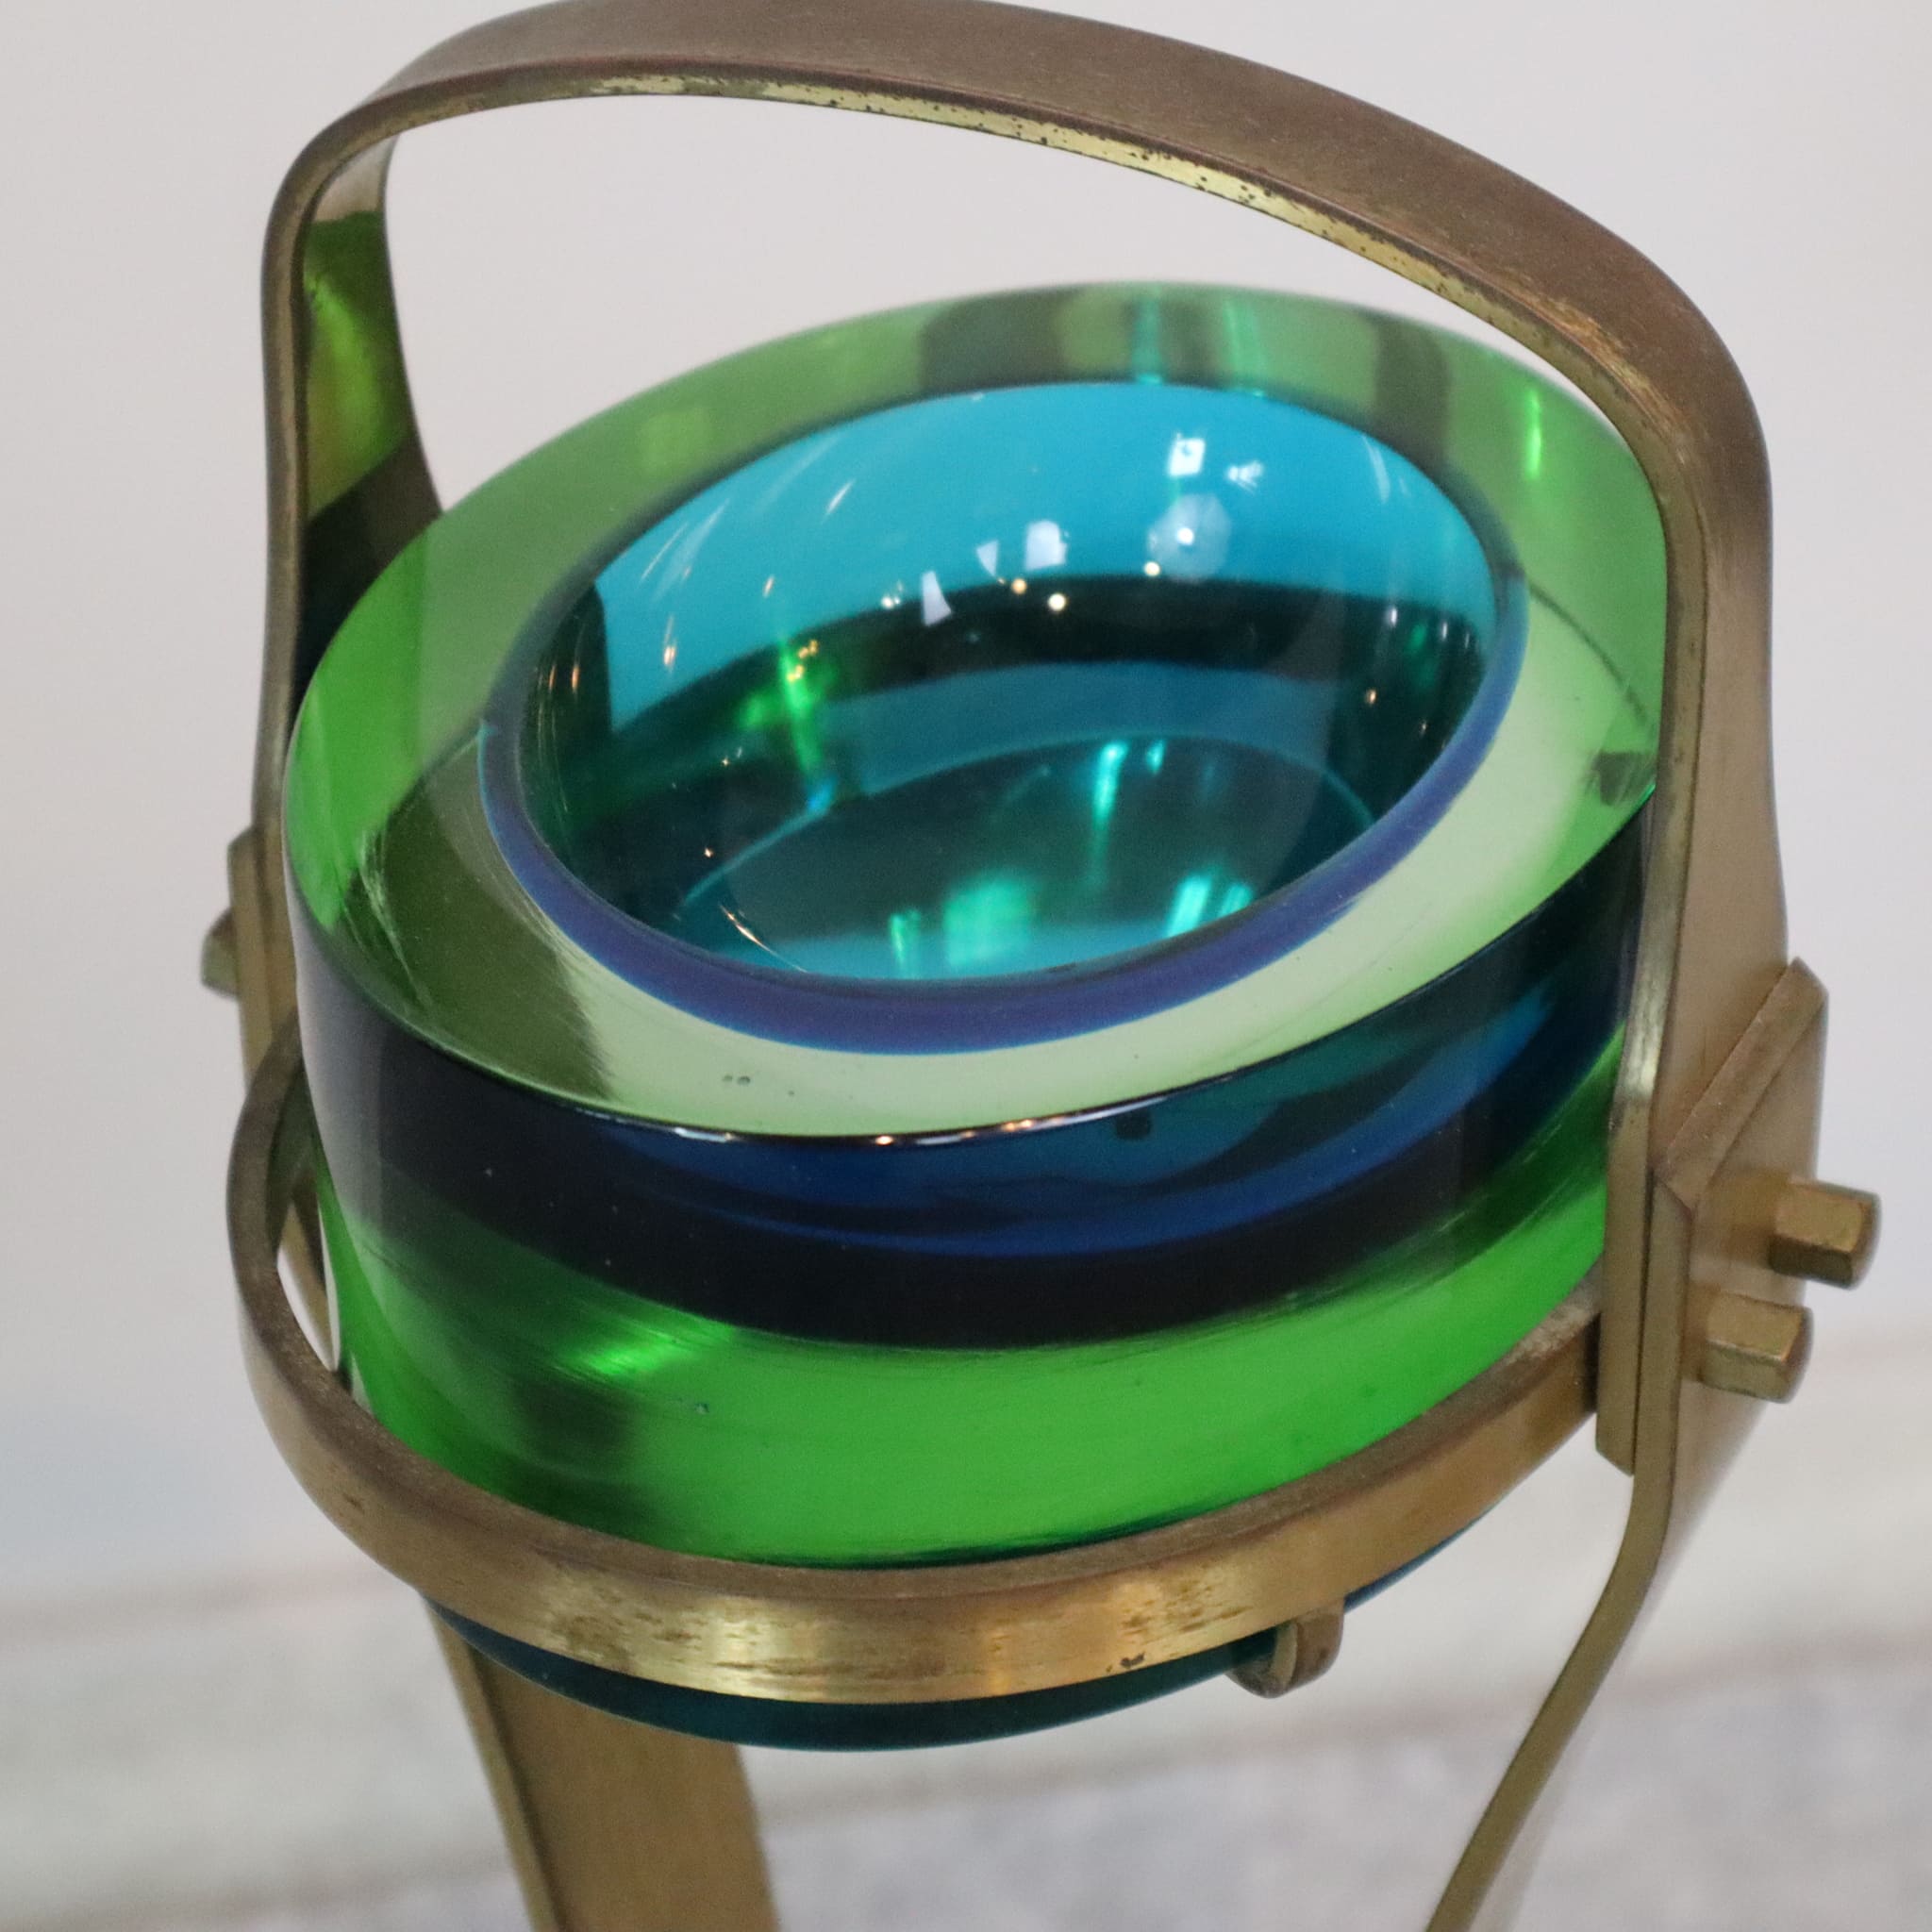 visionidepoca-modern-art-ashtray-entrance-vintage-60s-70s-brass-structure-base-in-murano-glass-green-and-blue-glass-detail-and-colour